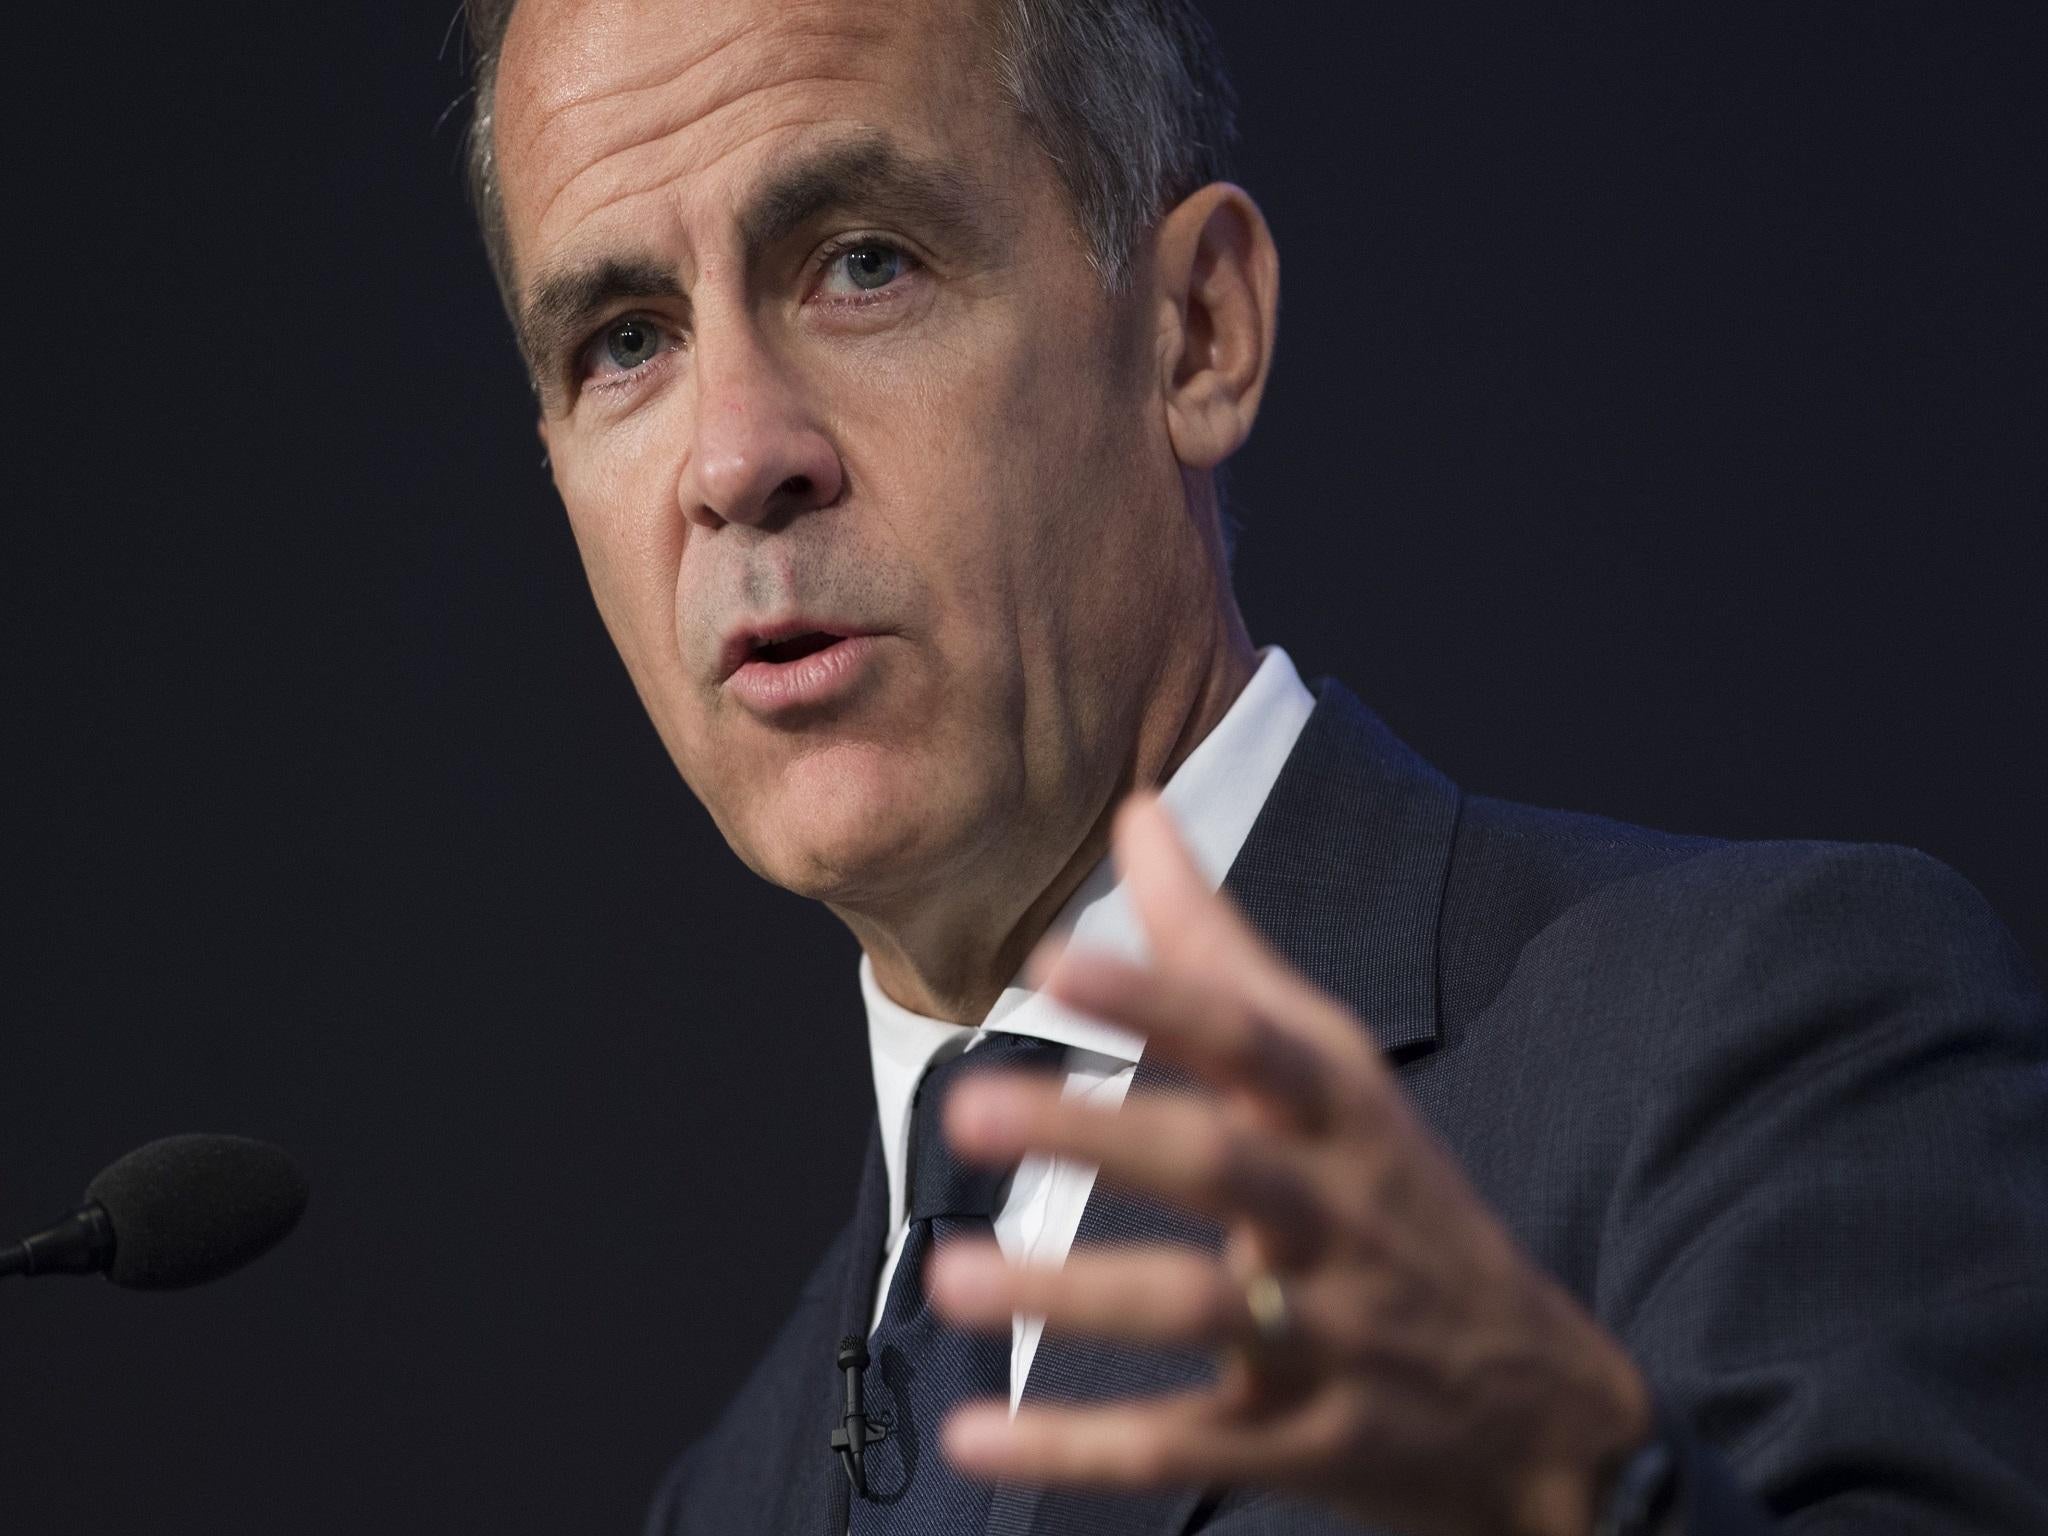 The Bank of England's governor Mark Carney recognises the value of a diverse workplace